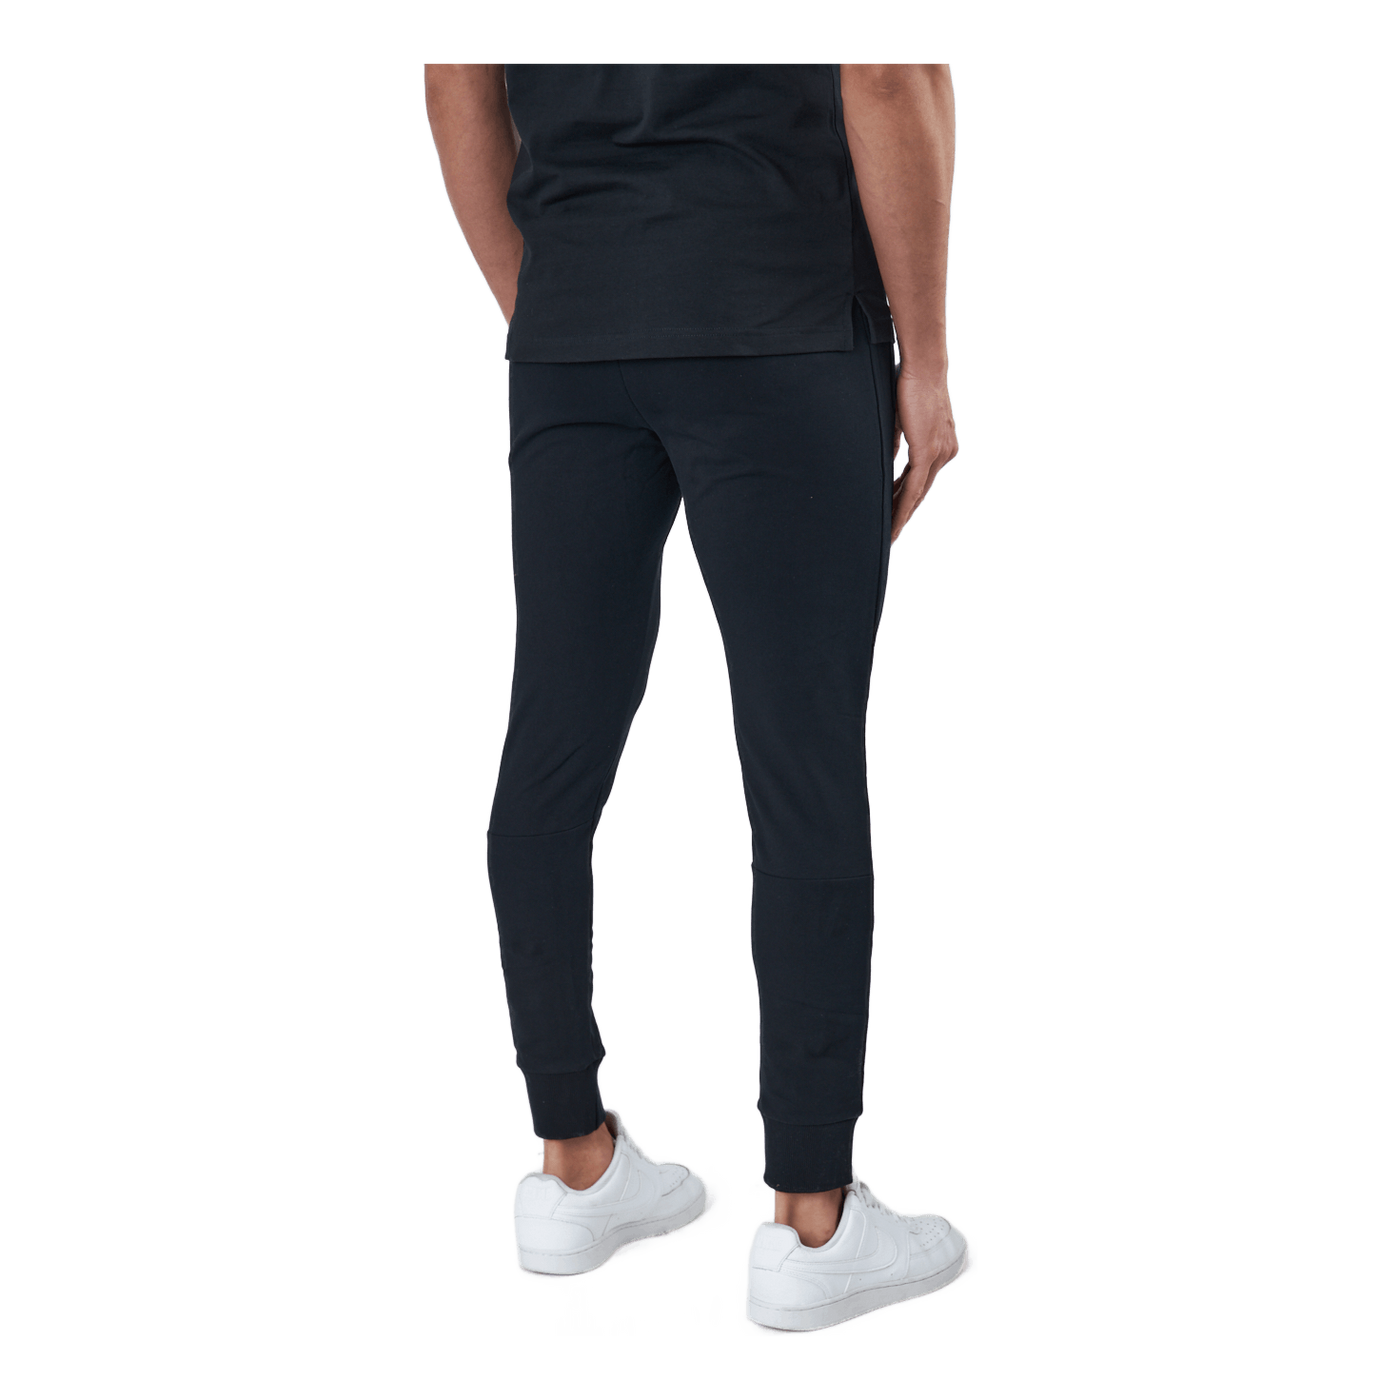 Gasp Tapered Joggers Black